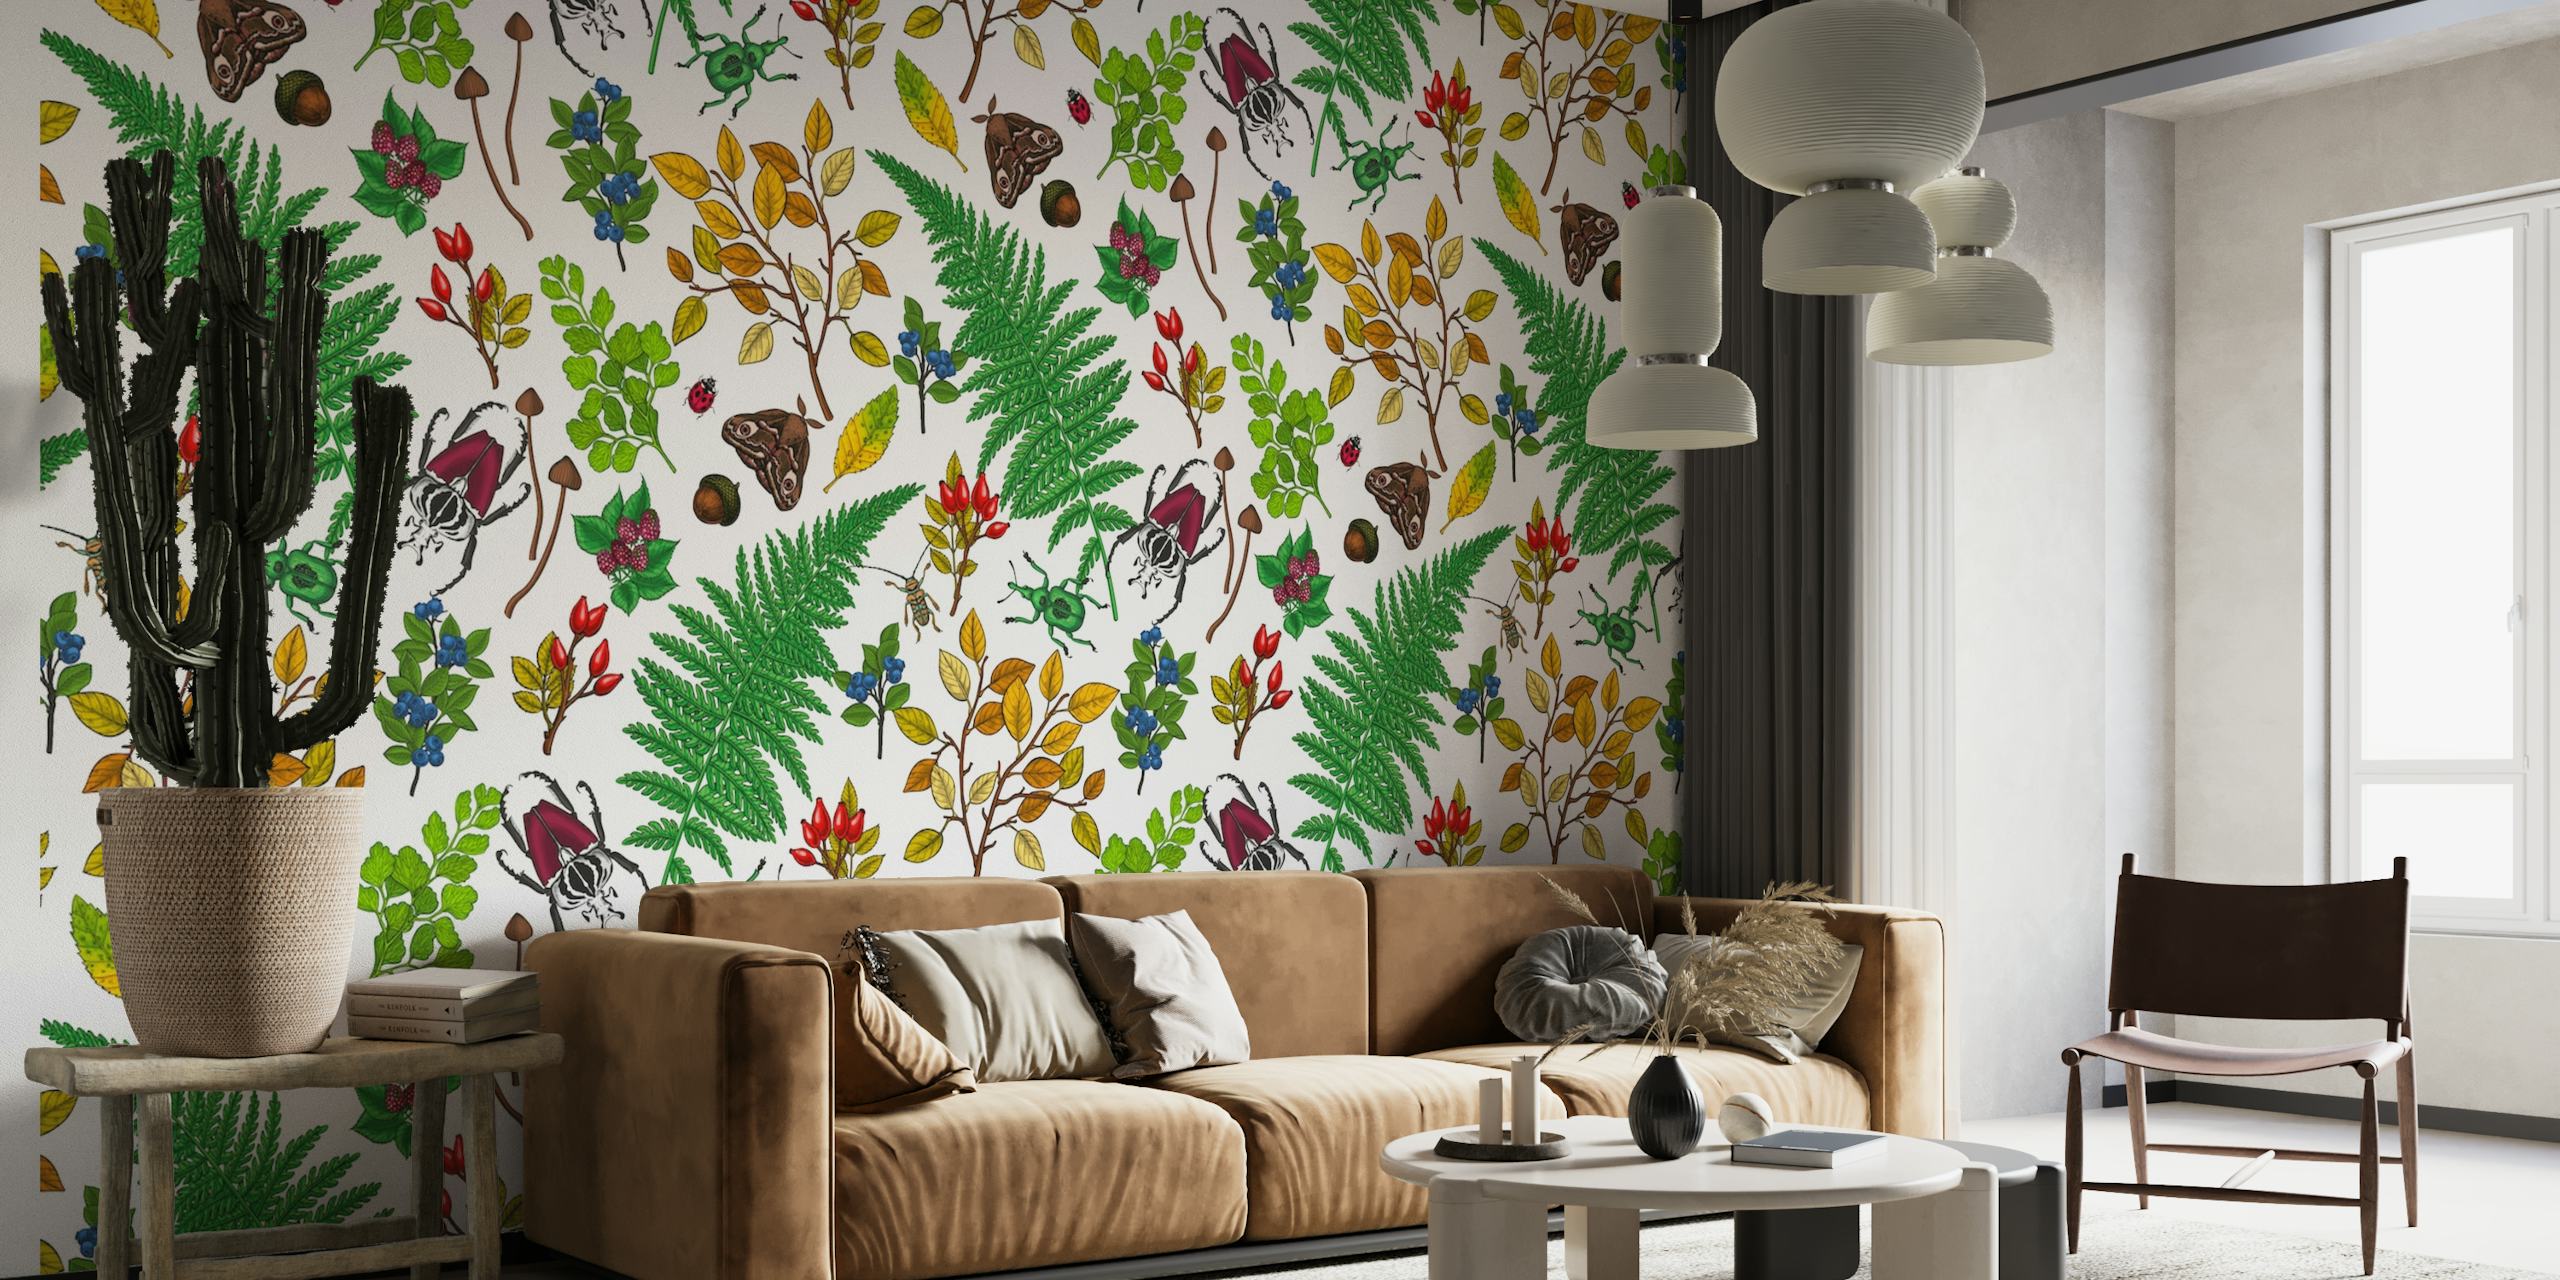 Wall mural of assorted forest berries and green leaves pattern on a light background